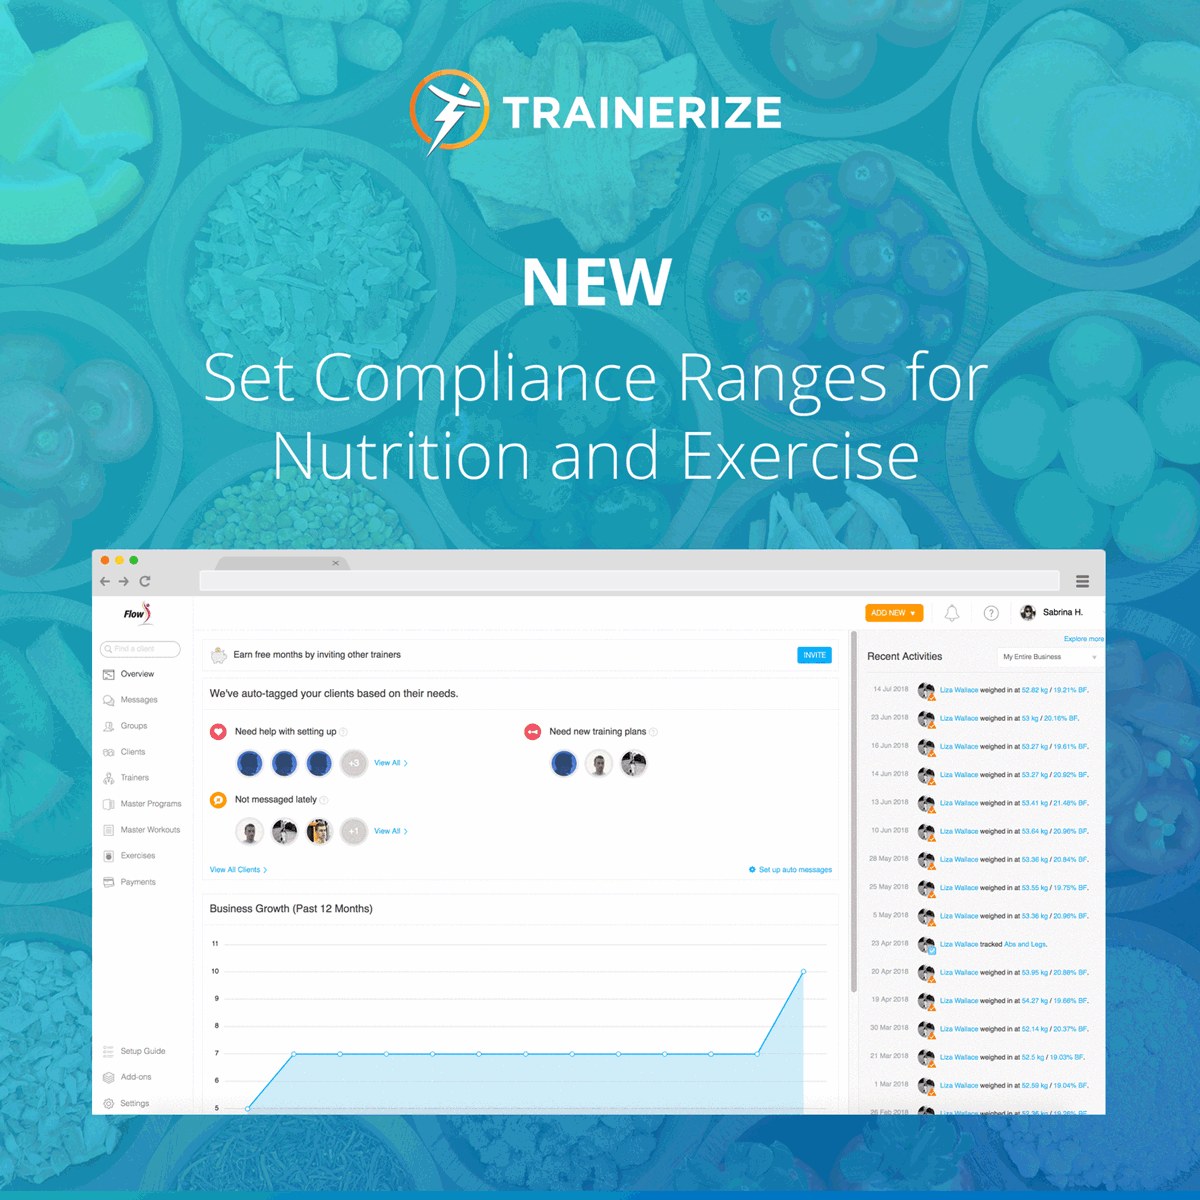 Set Compliance Ranges for Nutrition and Exercise in Trainerize